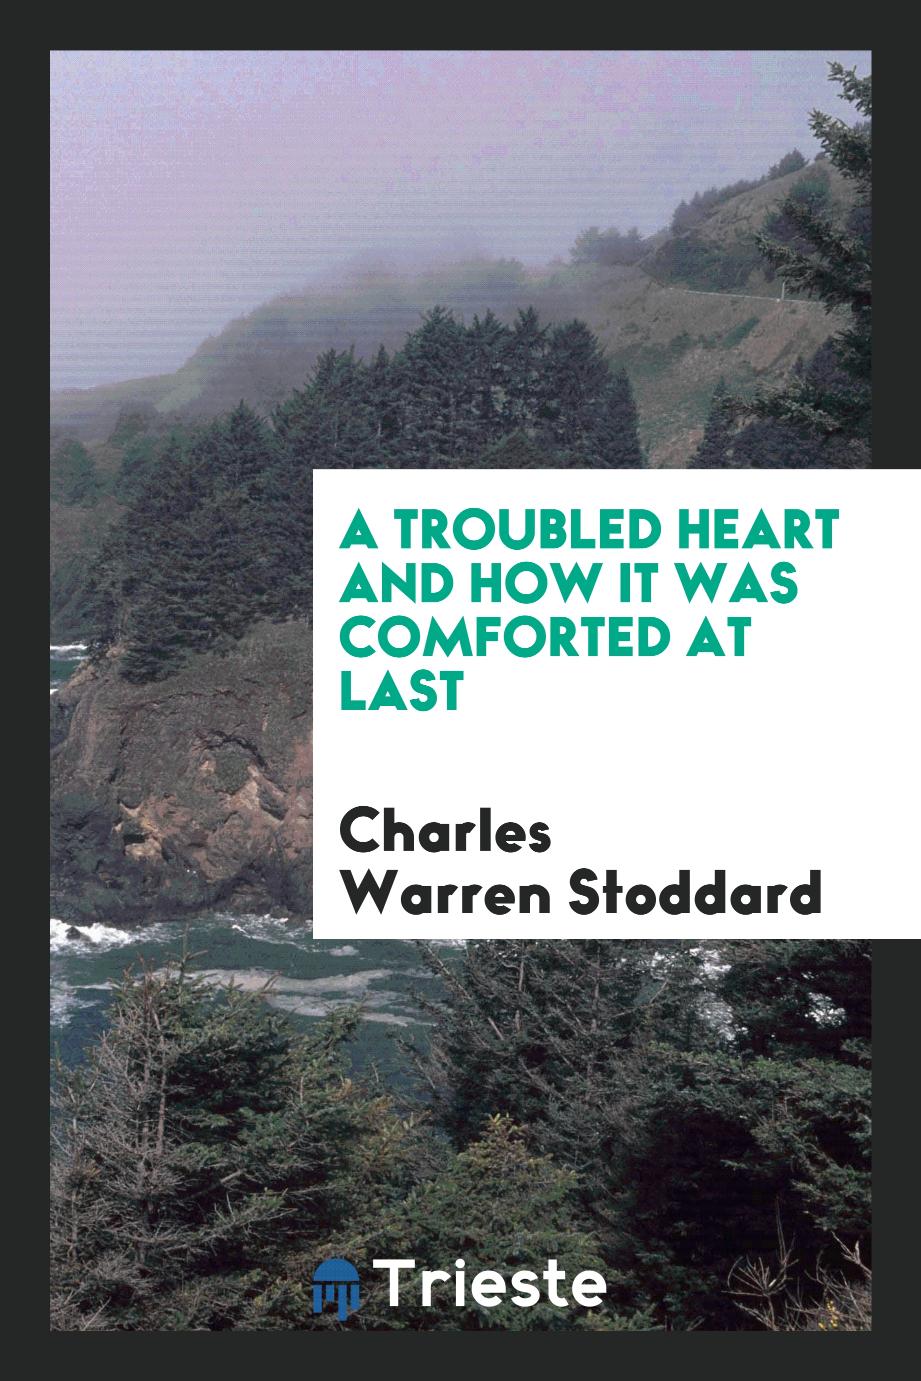 A Troubled Heart and How It Was Comforted at Last